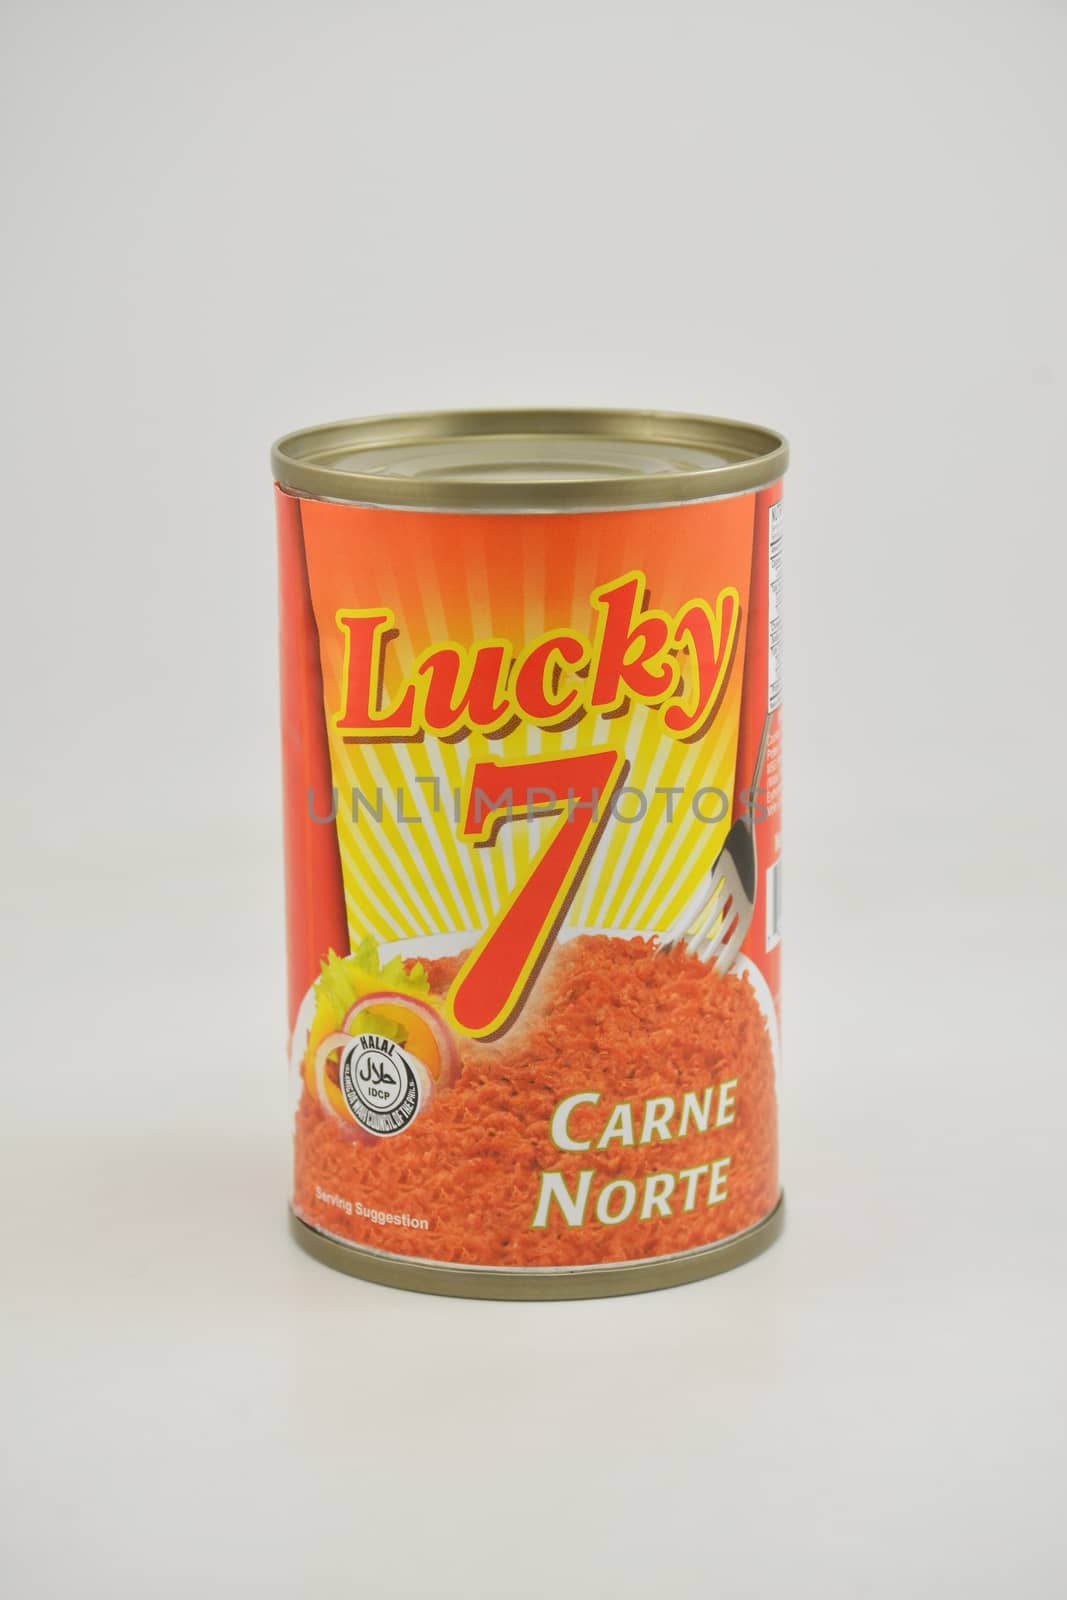 Lucky 7 carne norte corned beef can in Manila, Philippines by imwaltersy